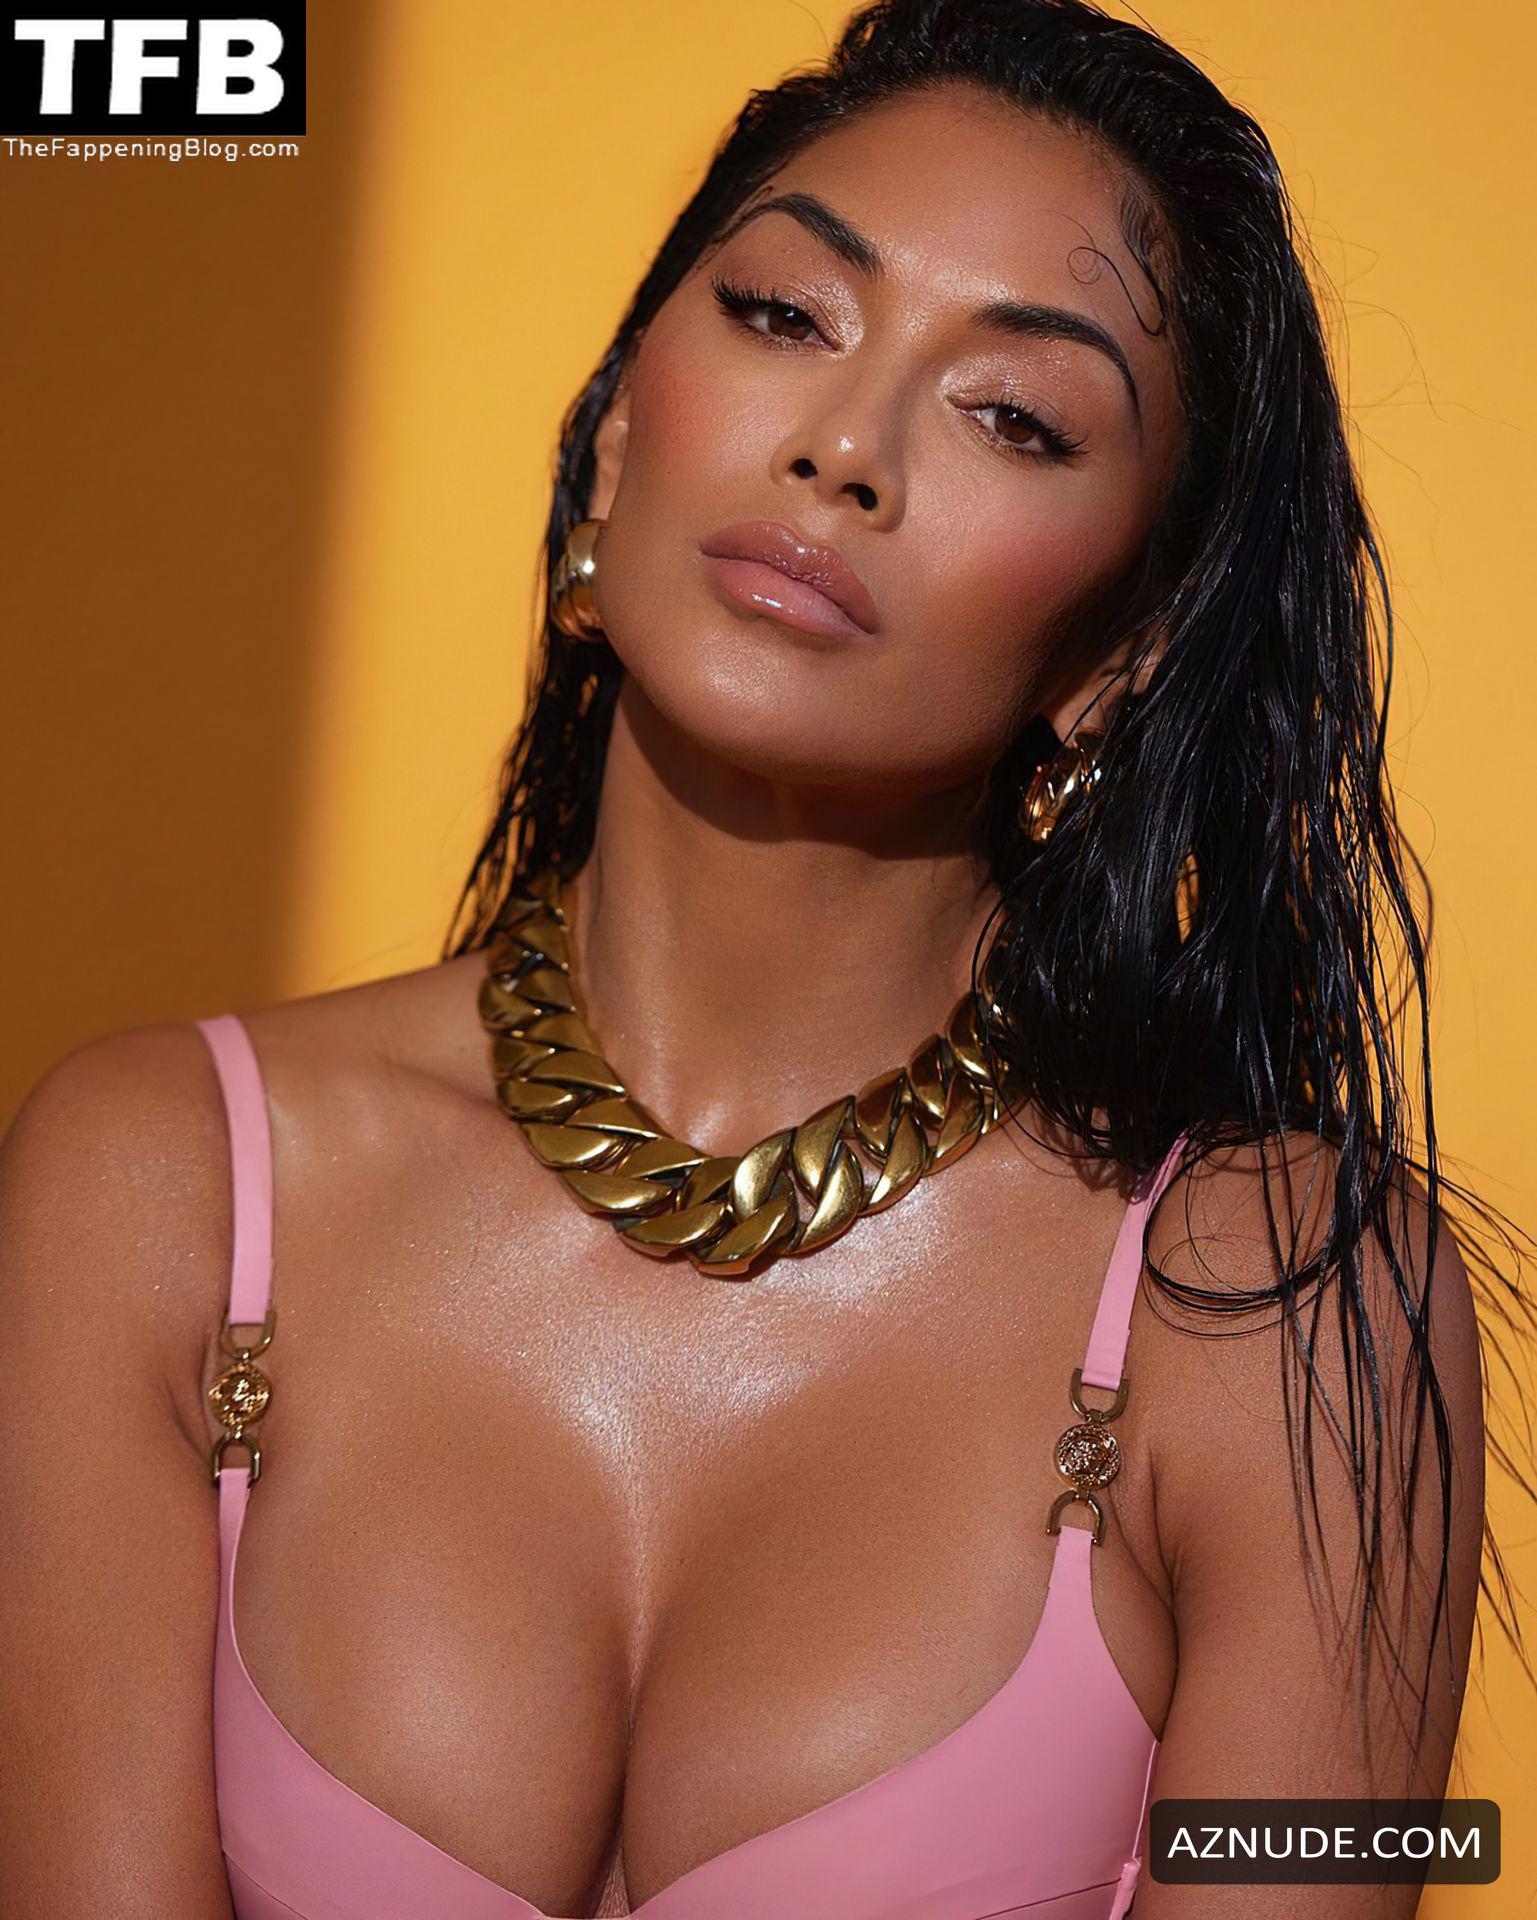 Nicole Scherzinger Sexy Poses Showing Off Her Big Boobs And Hot Legs In A Fashion Photoshoot